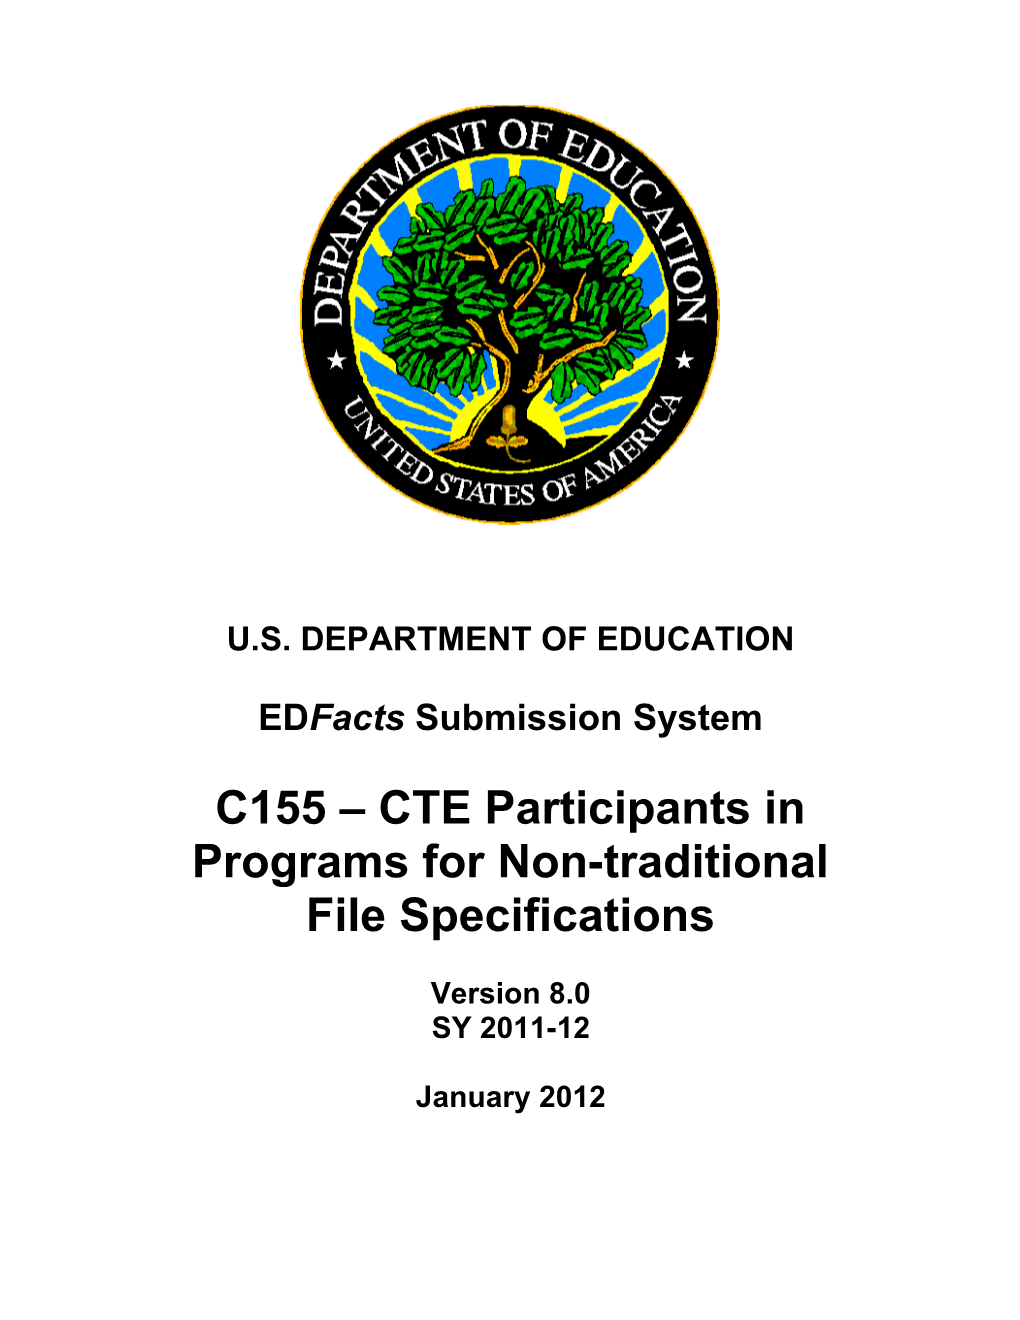 CTE Participants in Programs for Non-Traditional File Specifications